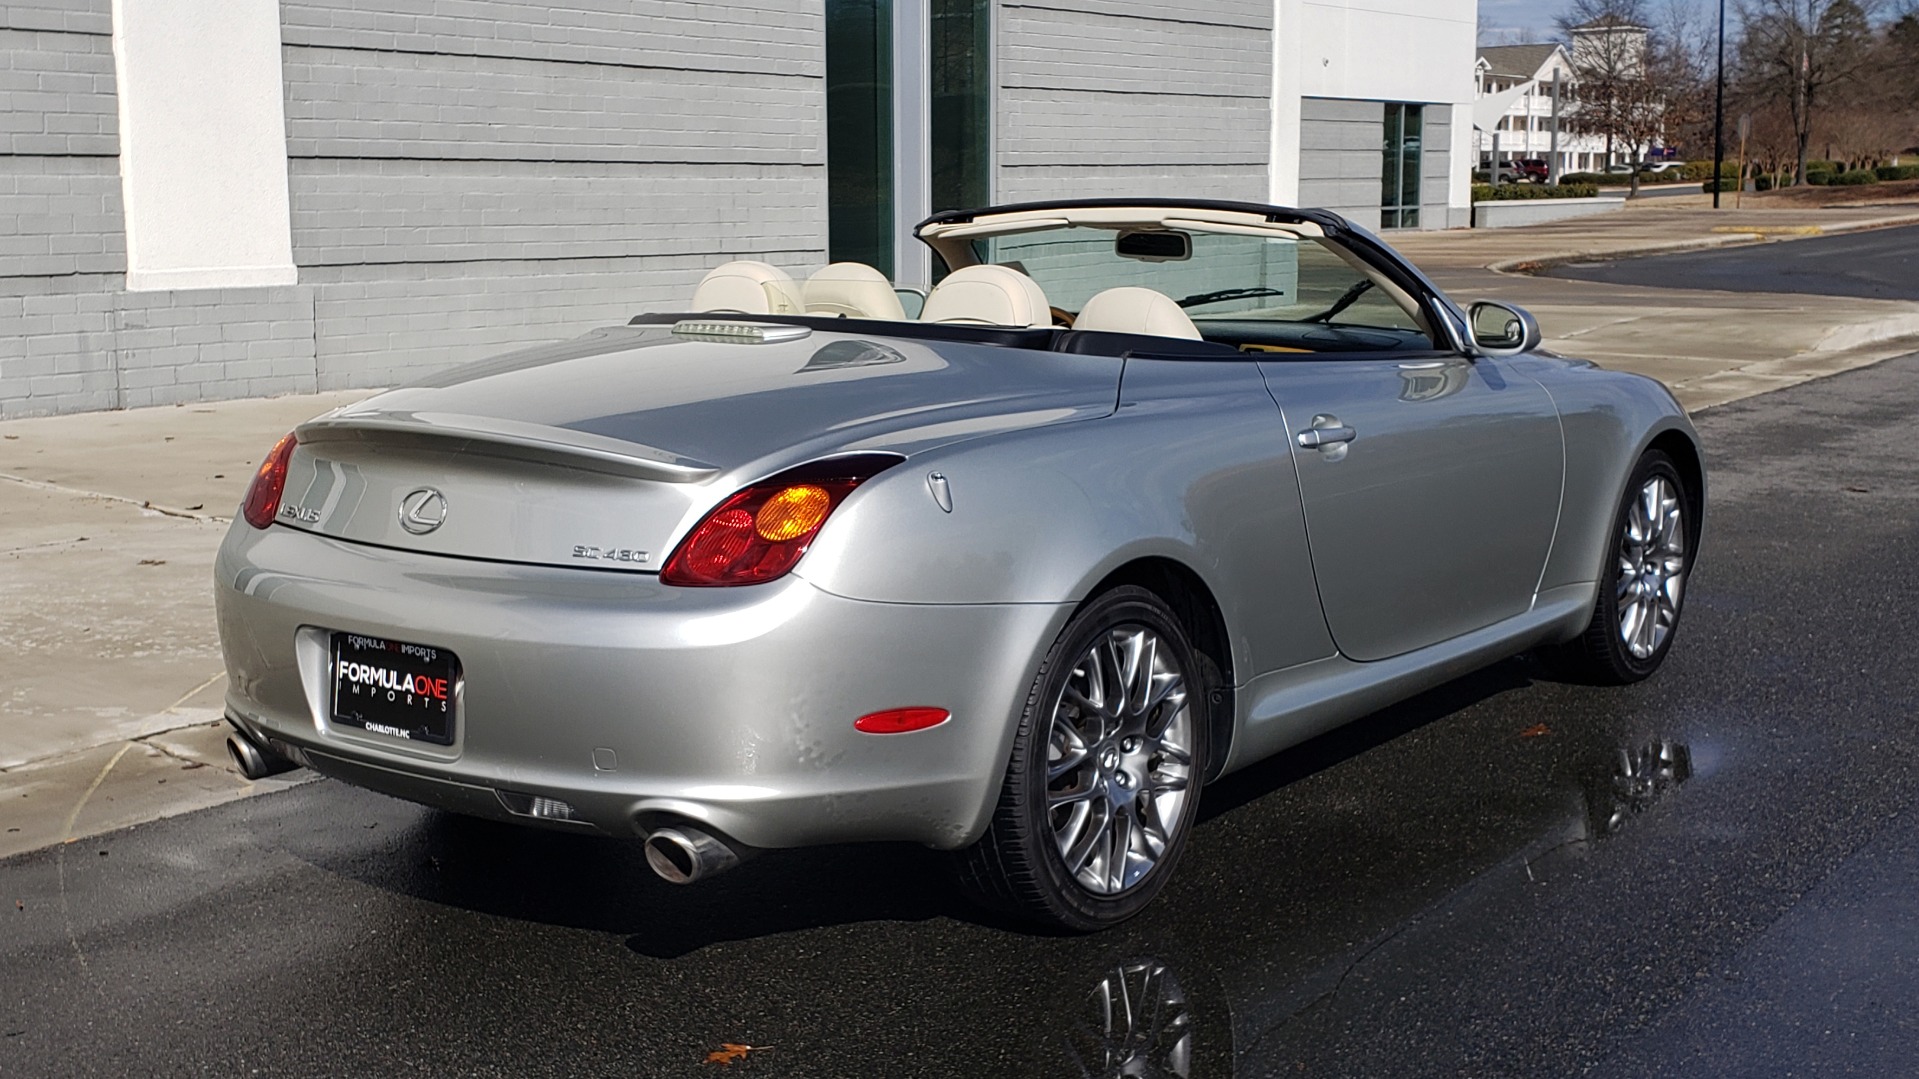 Used 2004 Lexus SC 430 CONVERTIBLE / 4.3L V8 / 5-SPD AUTO / MARK LEVINSON / 18IN WHEELS for sale Sold at Formula Imports in Charlotte NC 28227 16